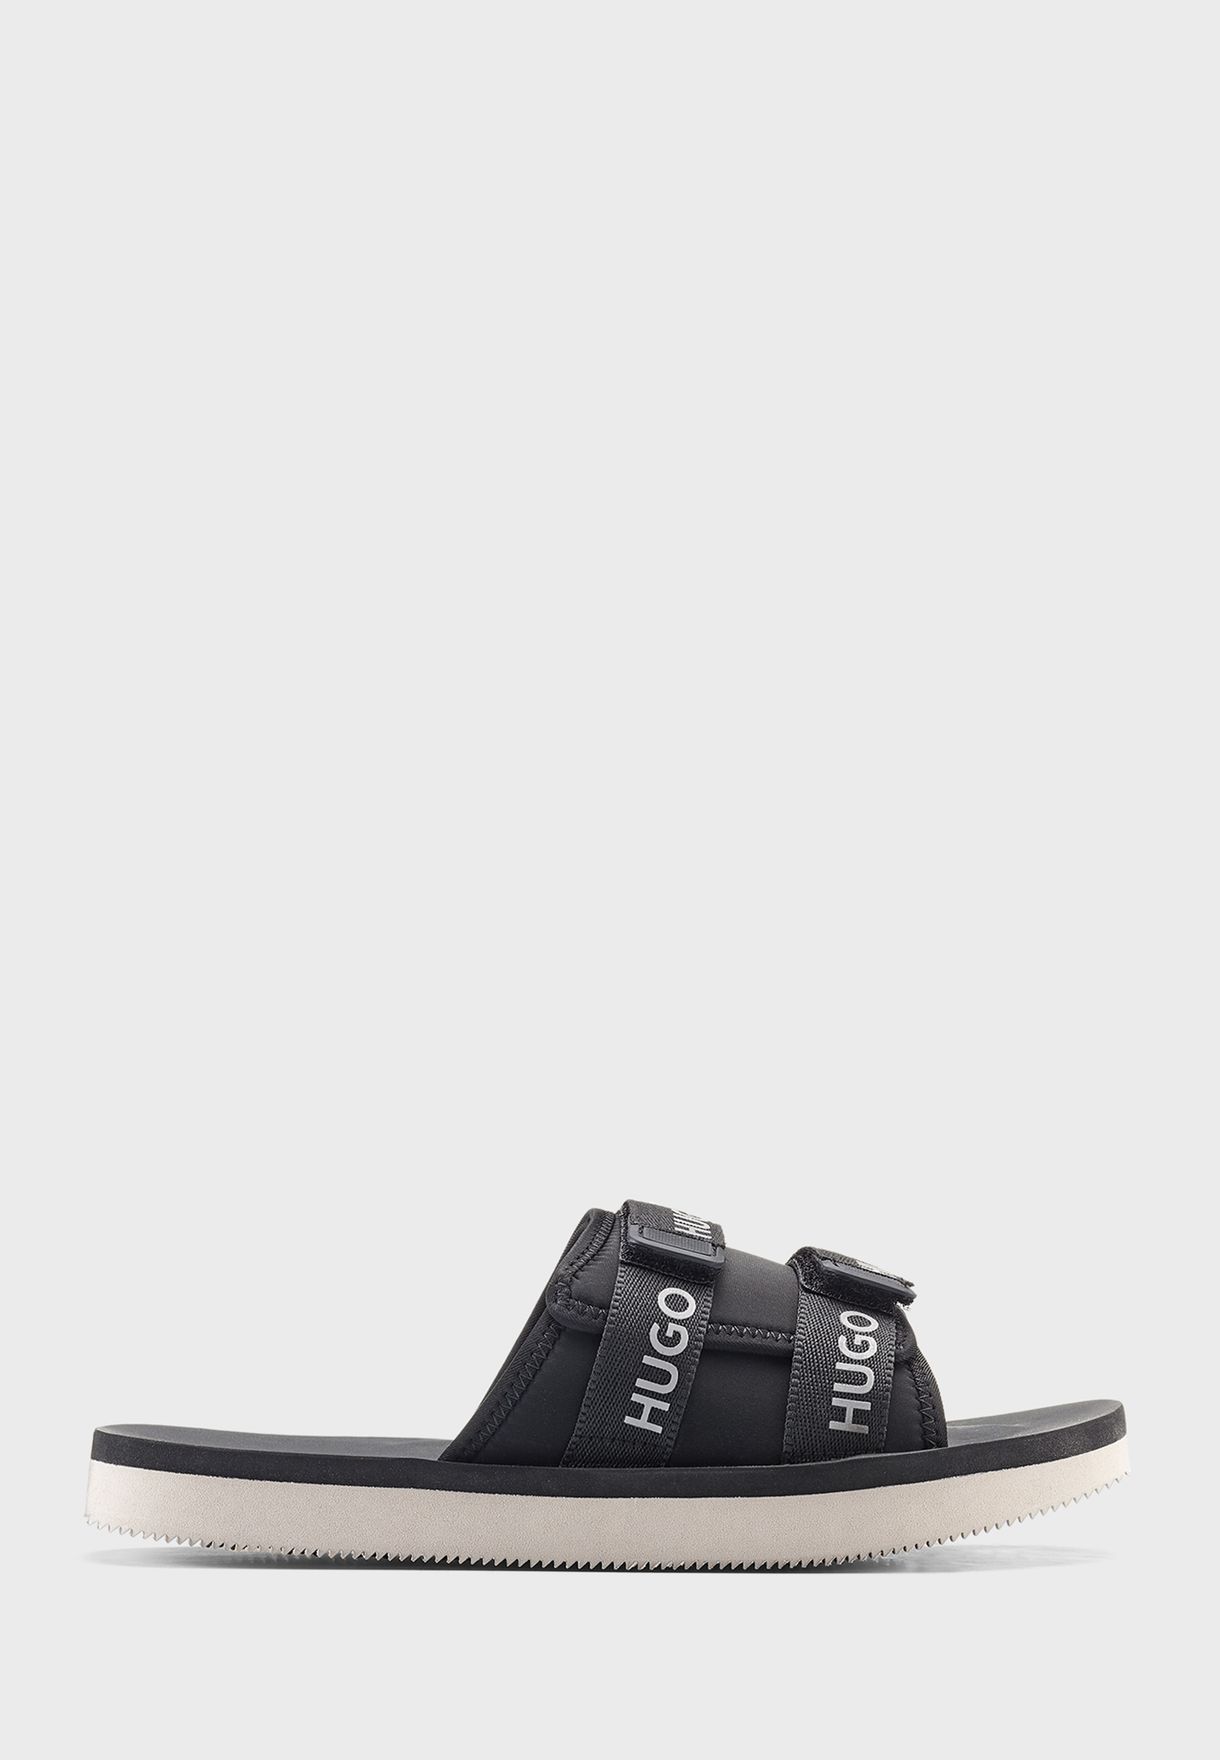 One Strap Casual Sandals